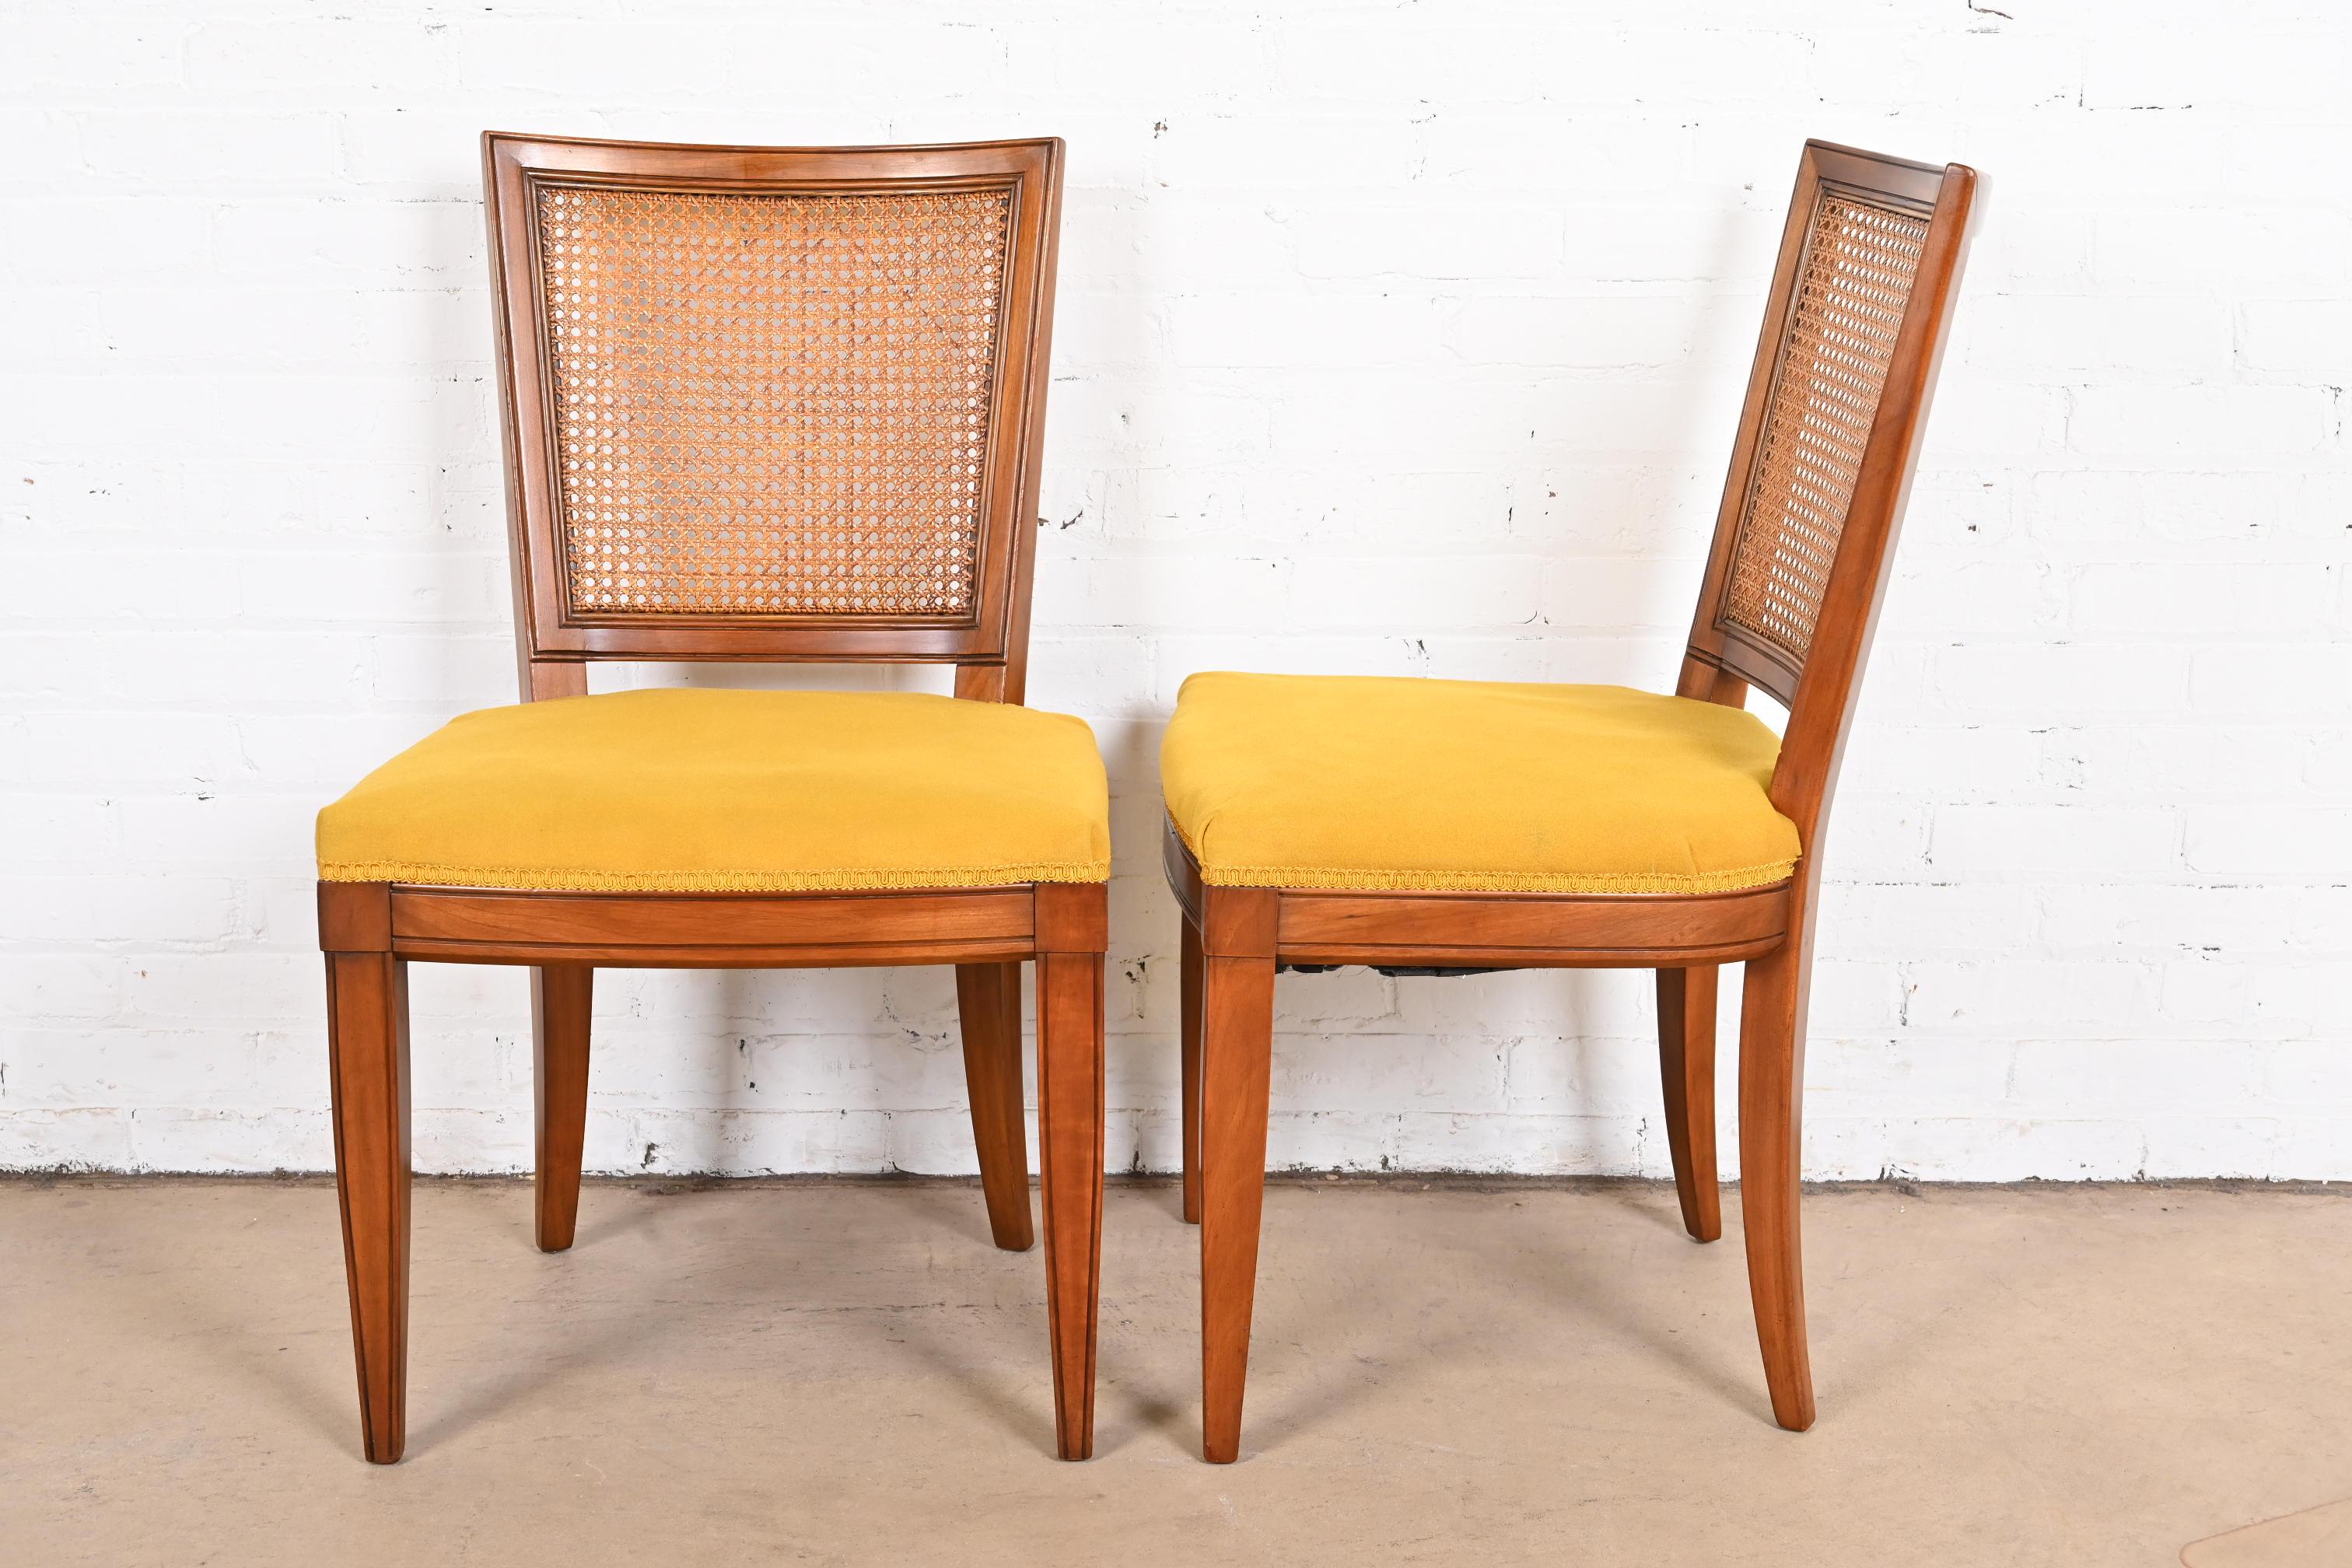 Kindel Furniture Midcentury French Regency Cherry Wood and Cane Dining Chairs 1